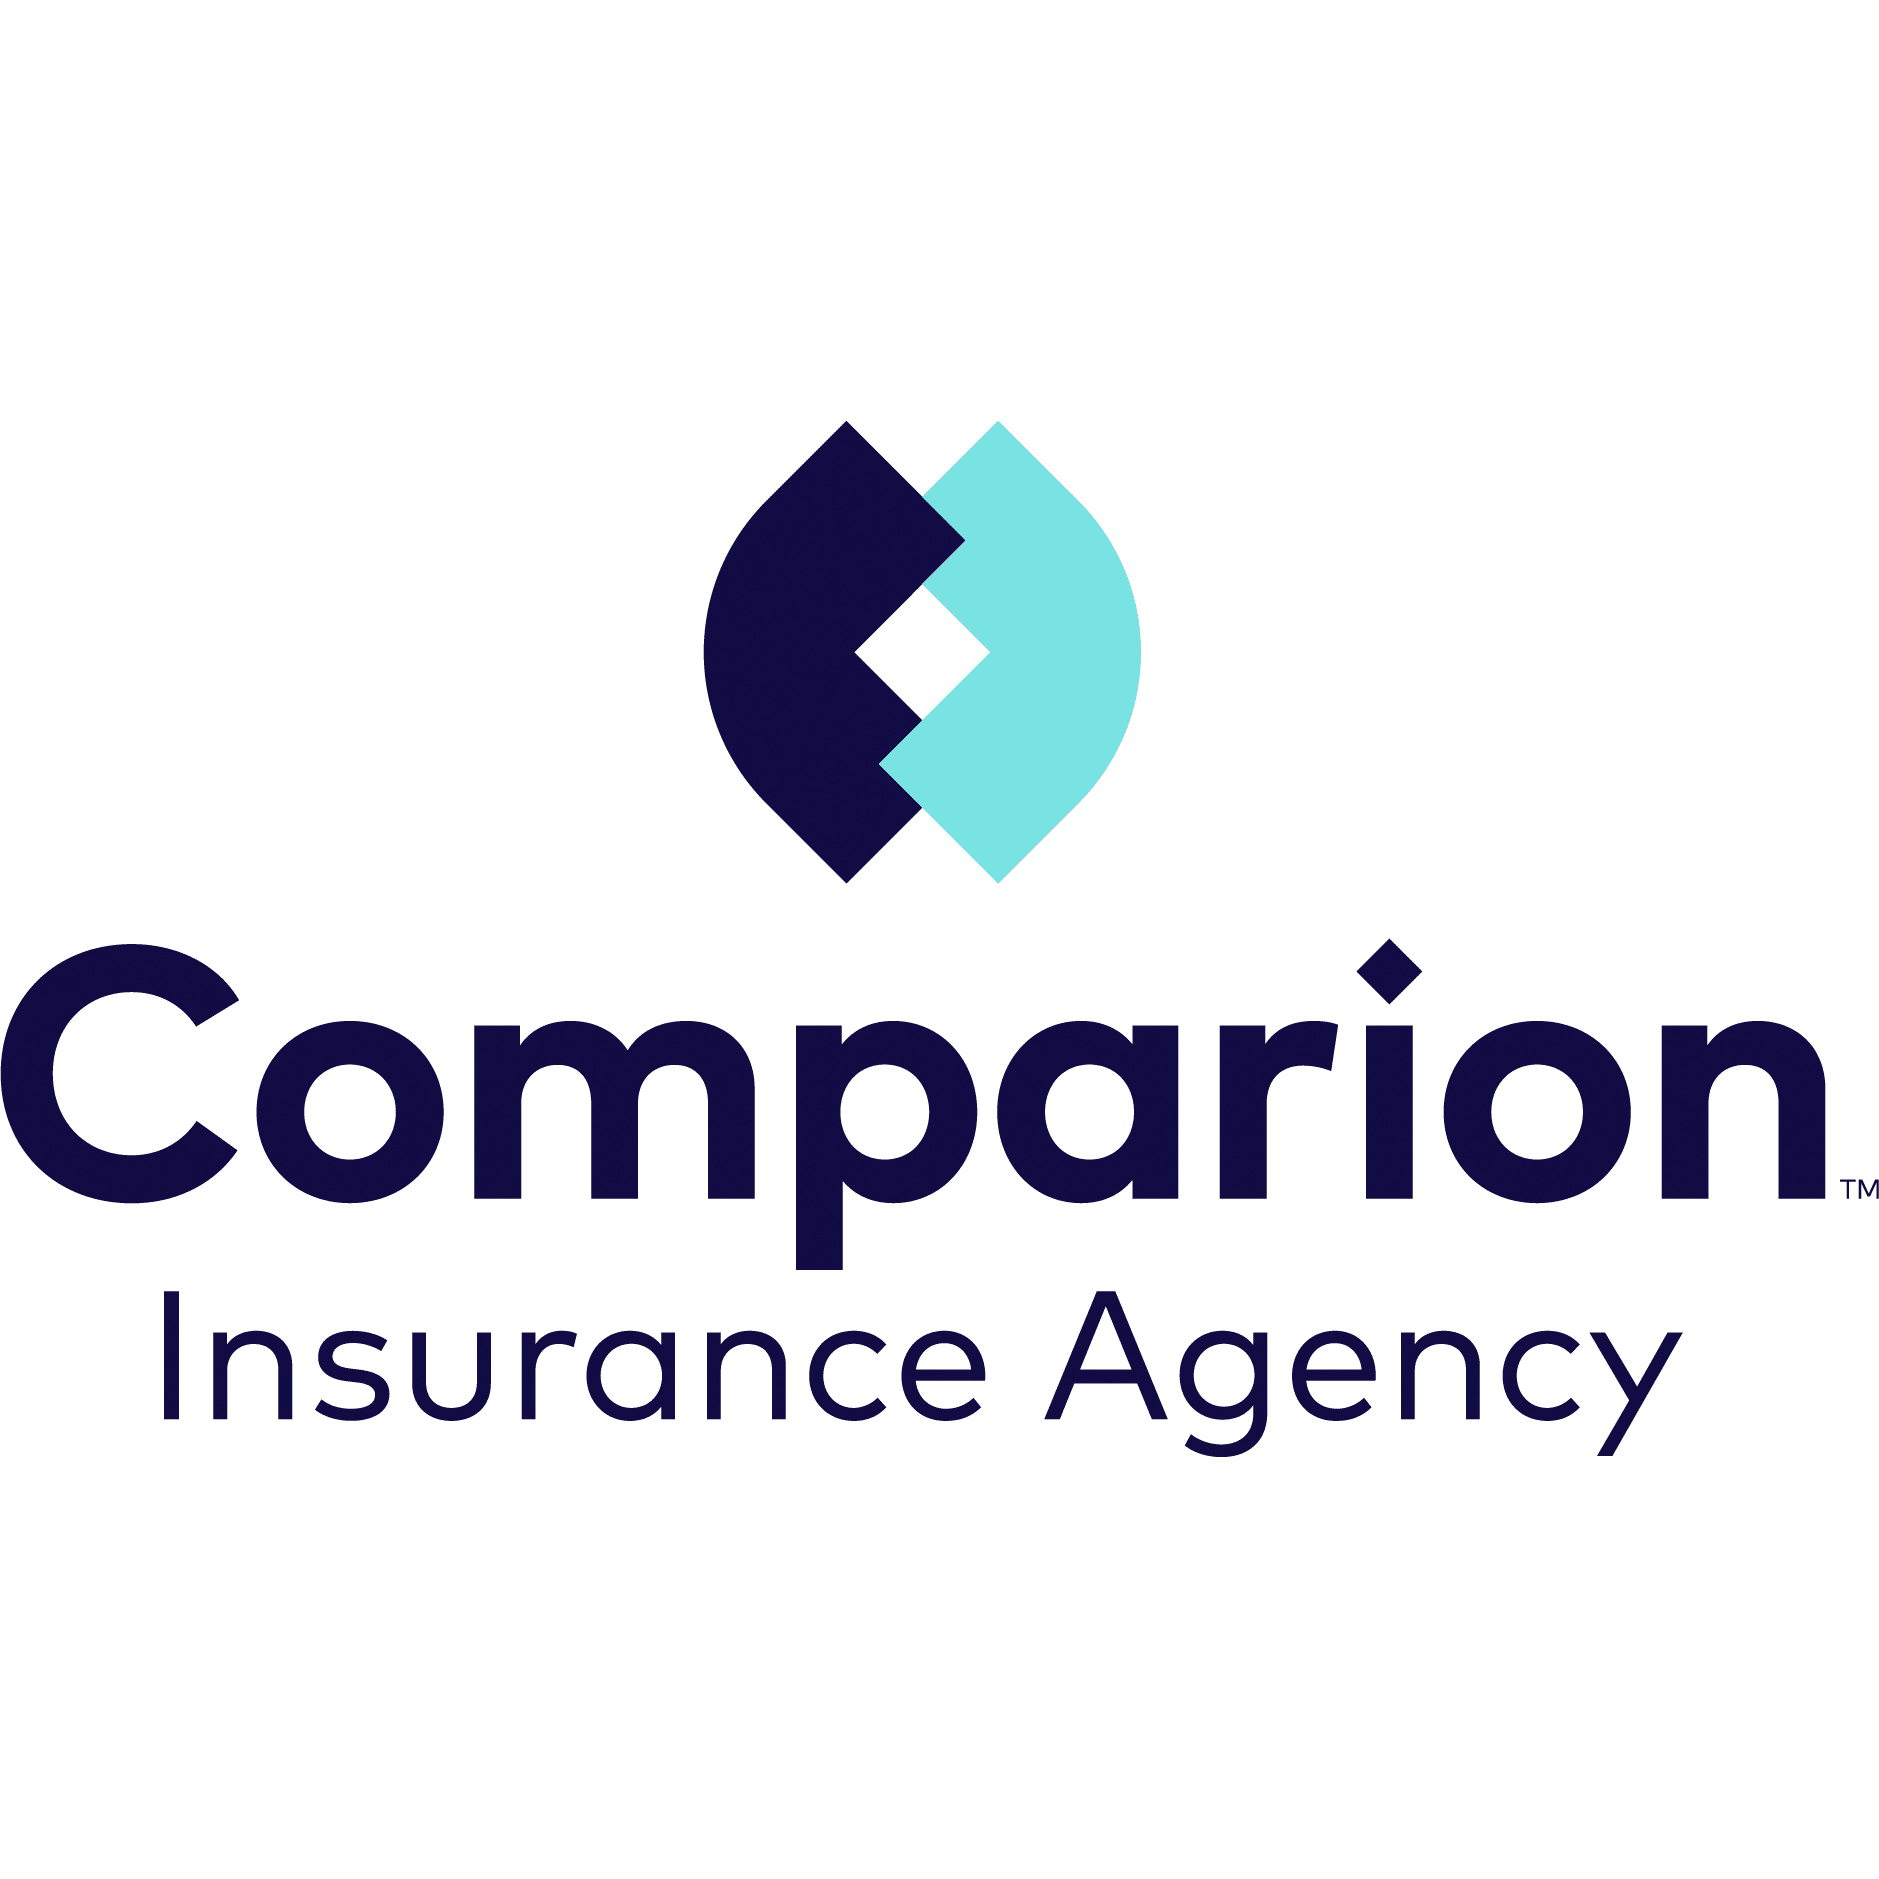 Ryan Capps at Comparion Insurance Agency